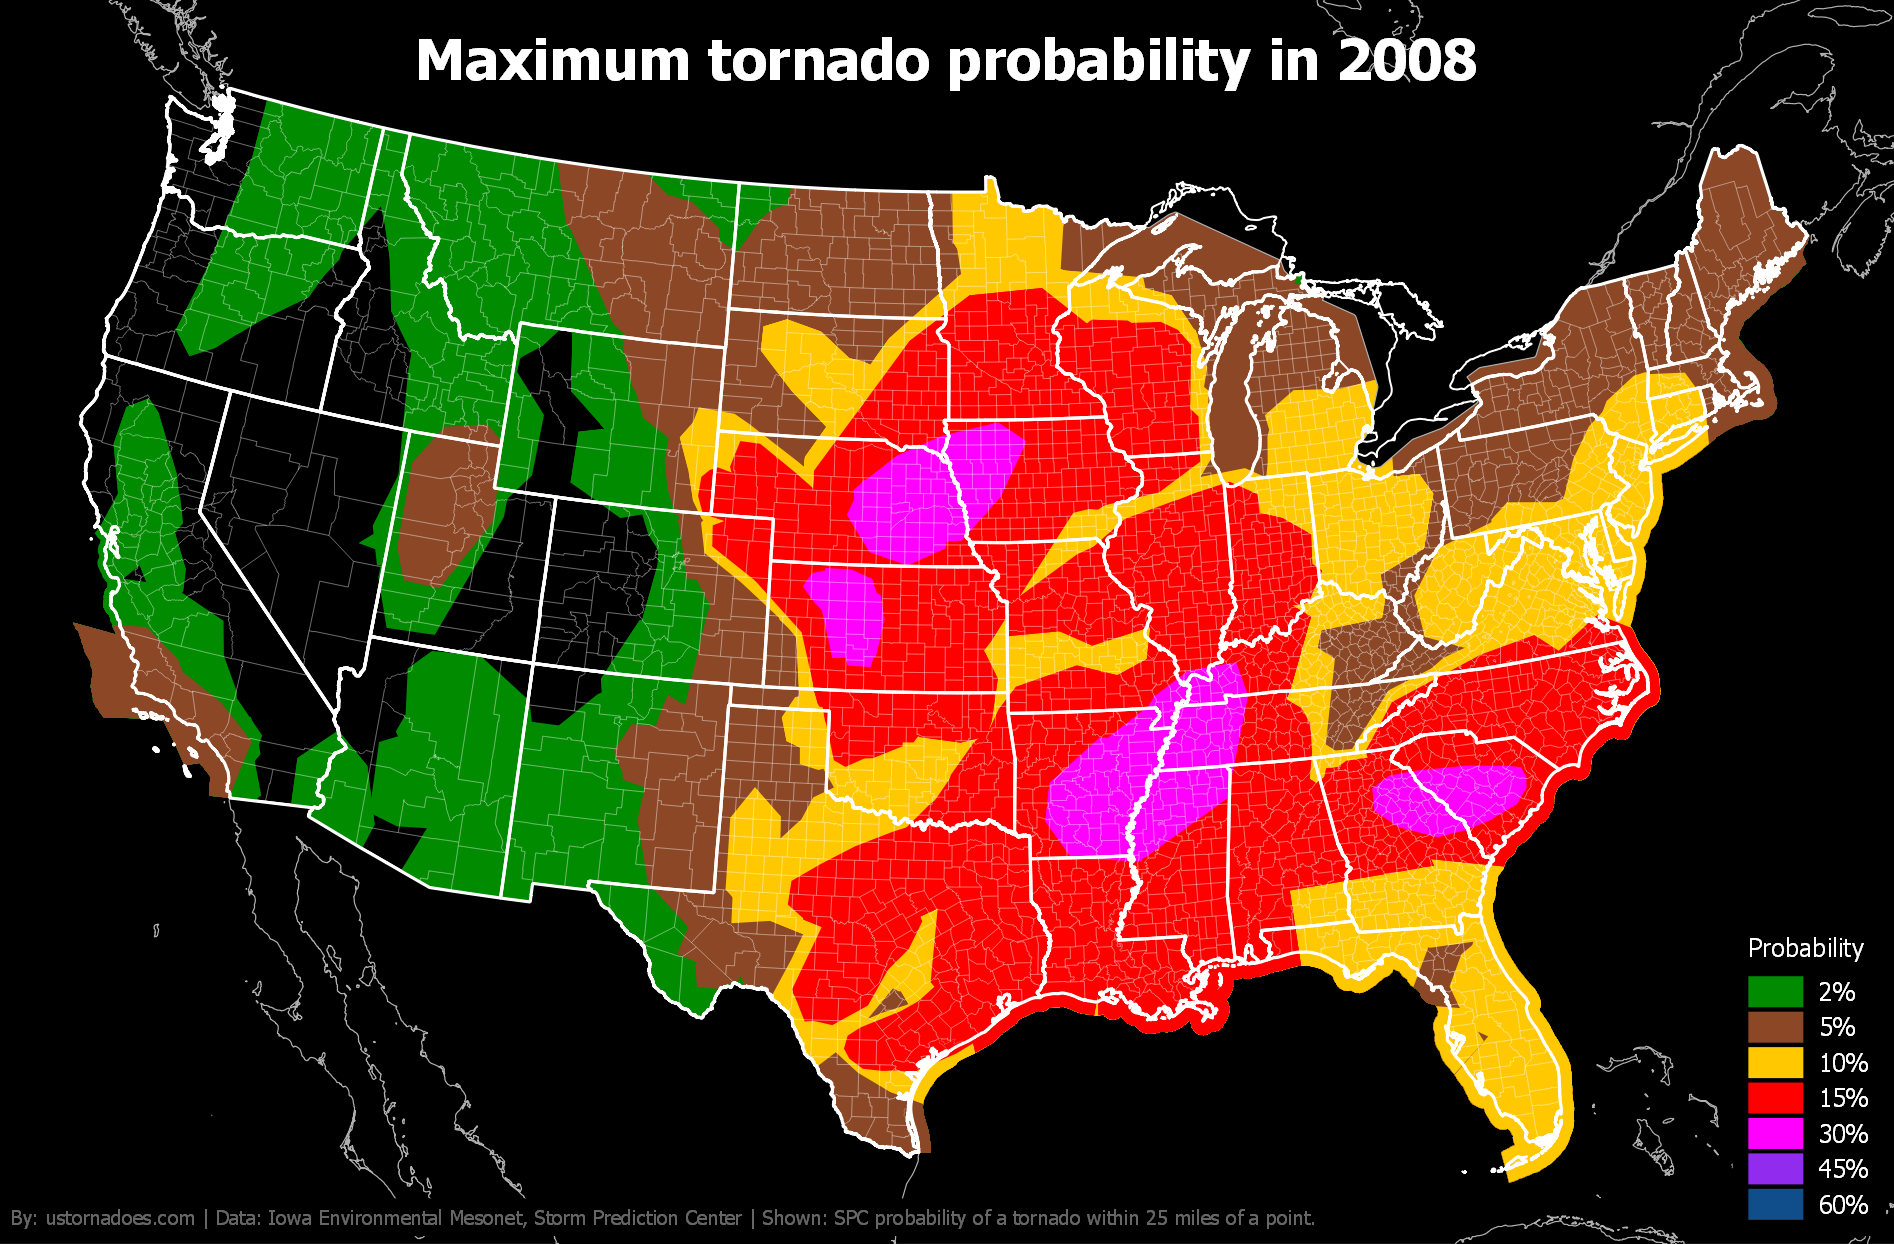 Maximum tornado probabilities by month and year - ustornadoes.com